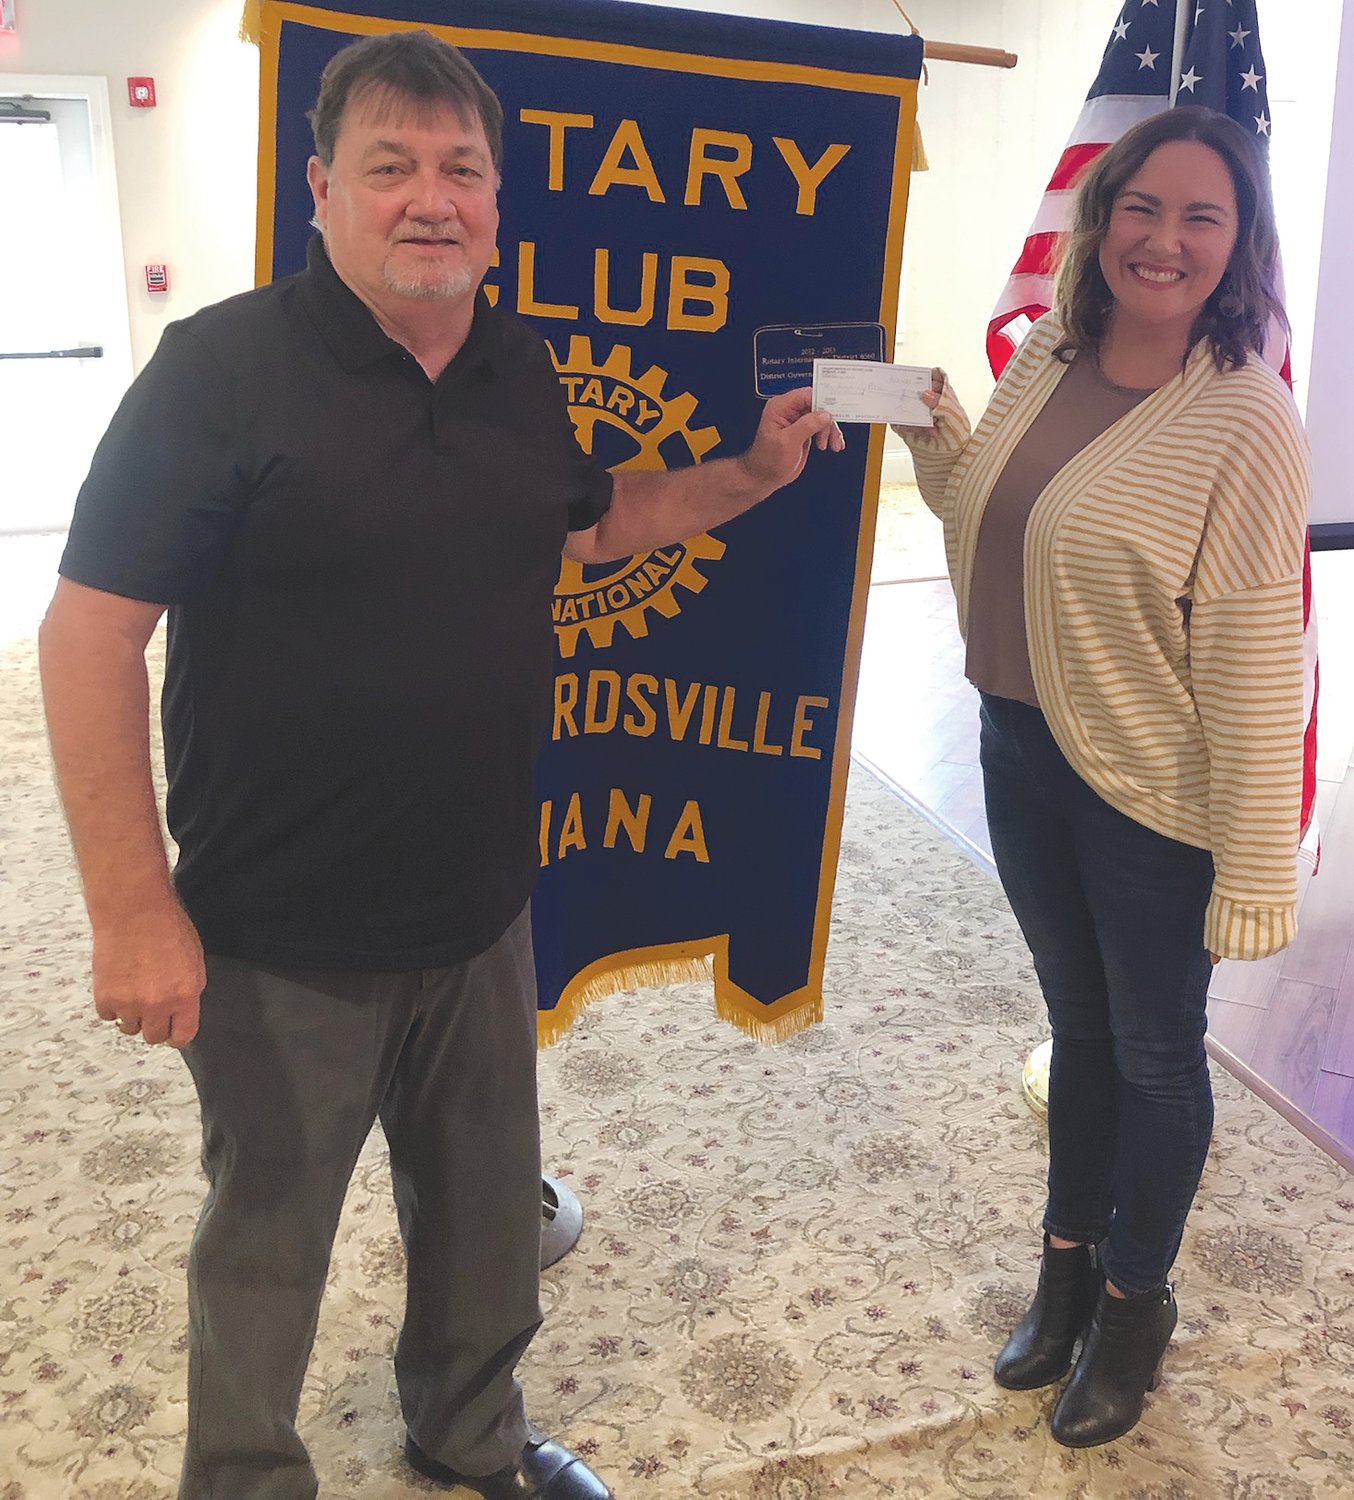 Anna Cope, a forensic interviewer from Susie’s Place, was this week’s guest speaker at the Crawfordsville Rotary Club. She gave an update on what she and her organization have been doing over the past year. Susie’s Place is a child advocacy center at 7519 Beechwood Centre Road, Avon. Pictured is Rod Currin (Rotary treasurer) giving his daughter a check for $1,000 to support this great organization.